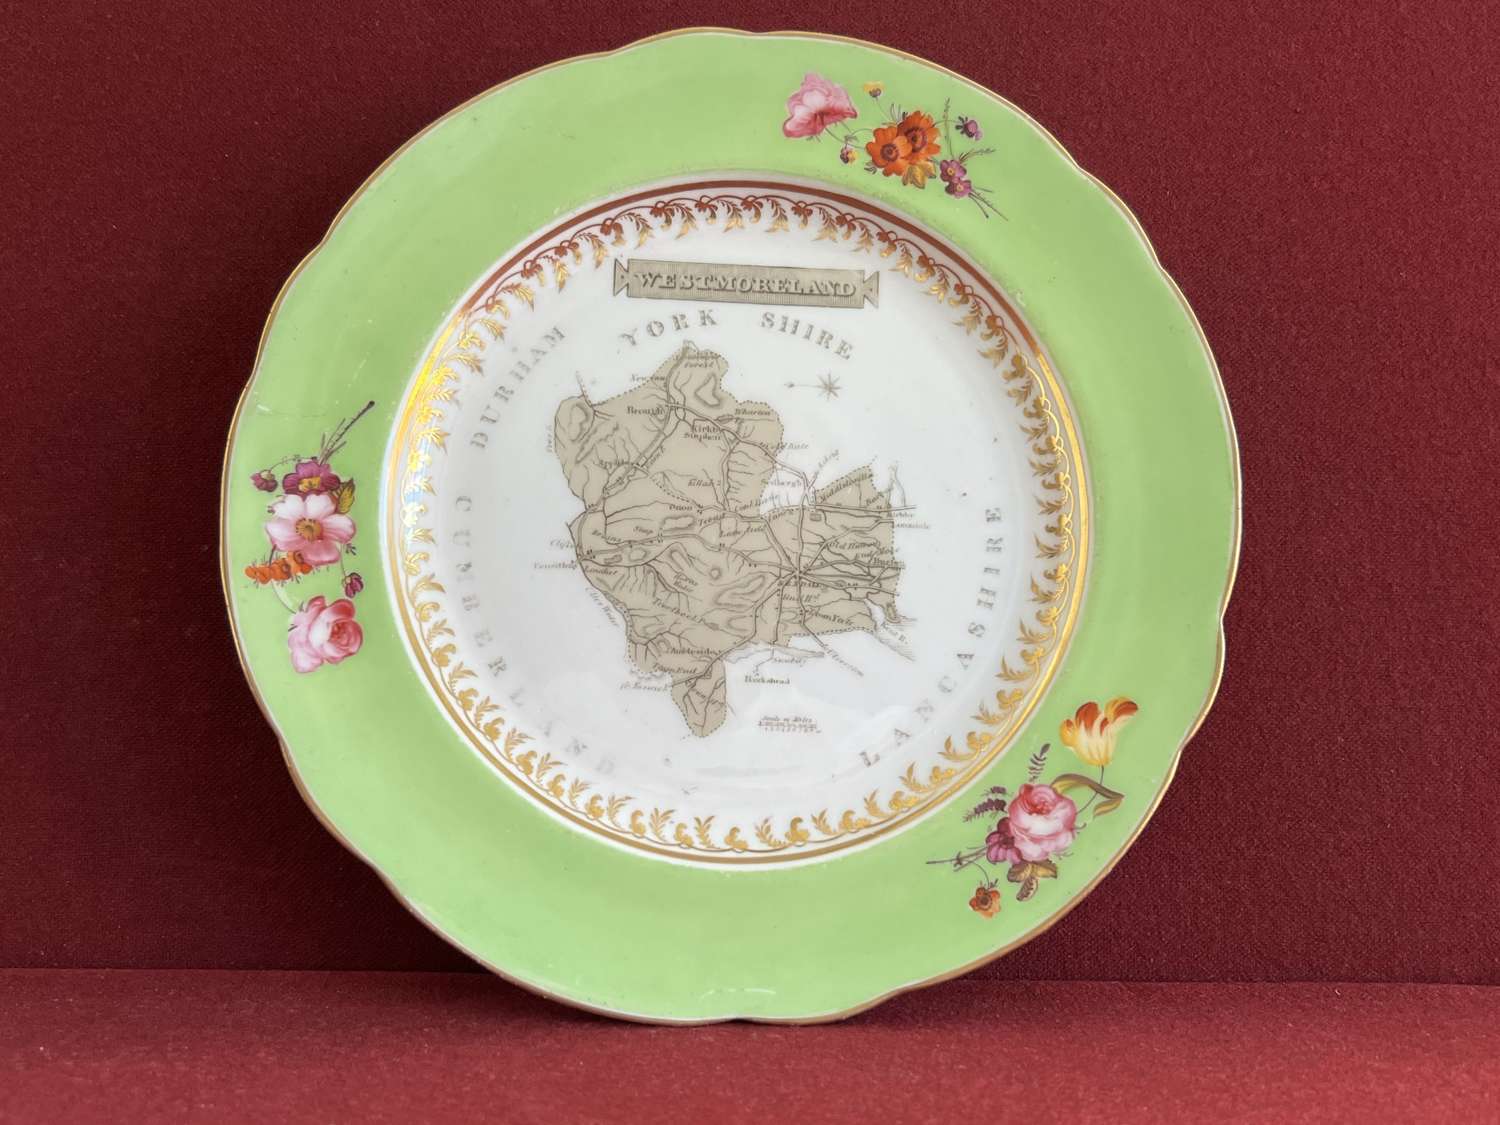 A rare Coalport Porcelain Plate with a Map of Westmoreland c.1835-1840